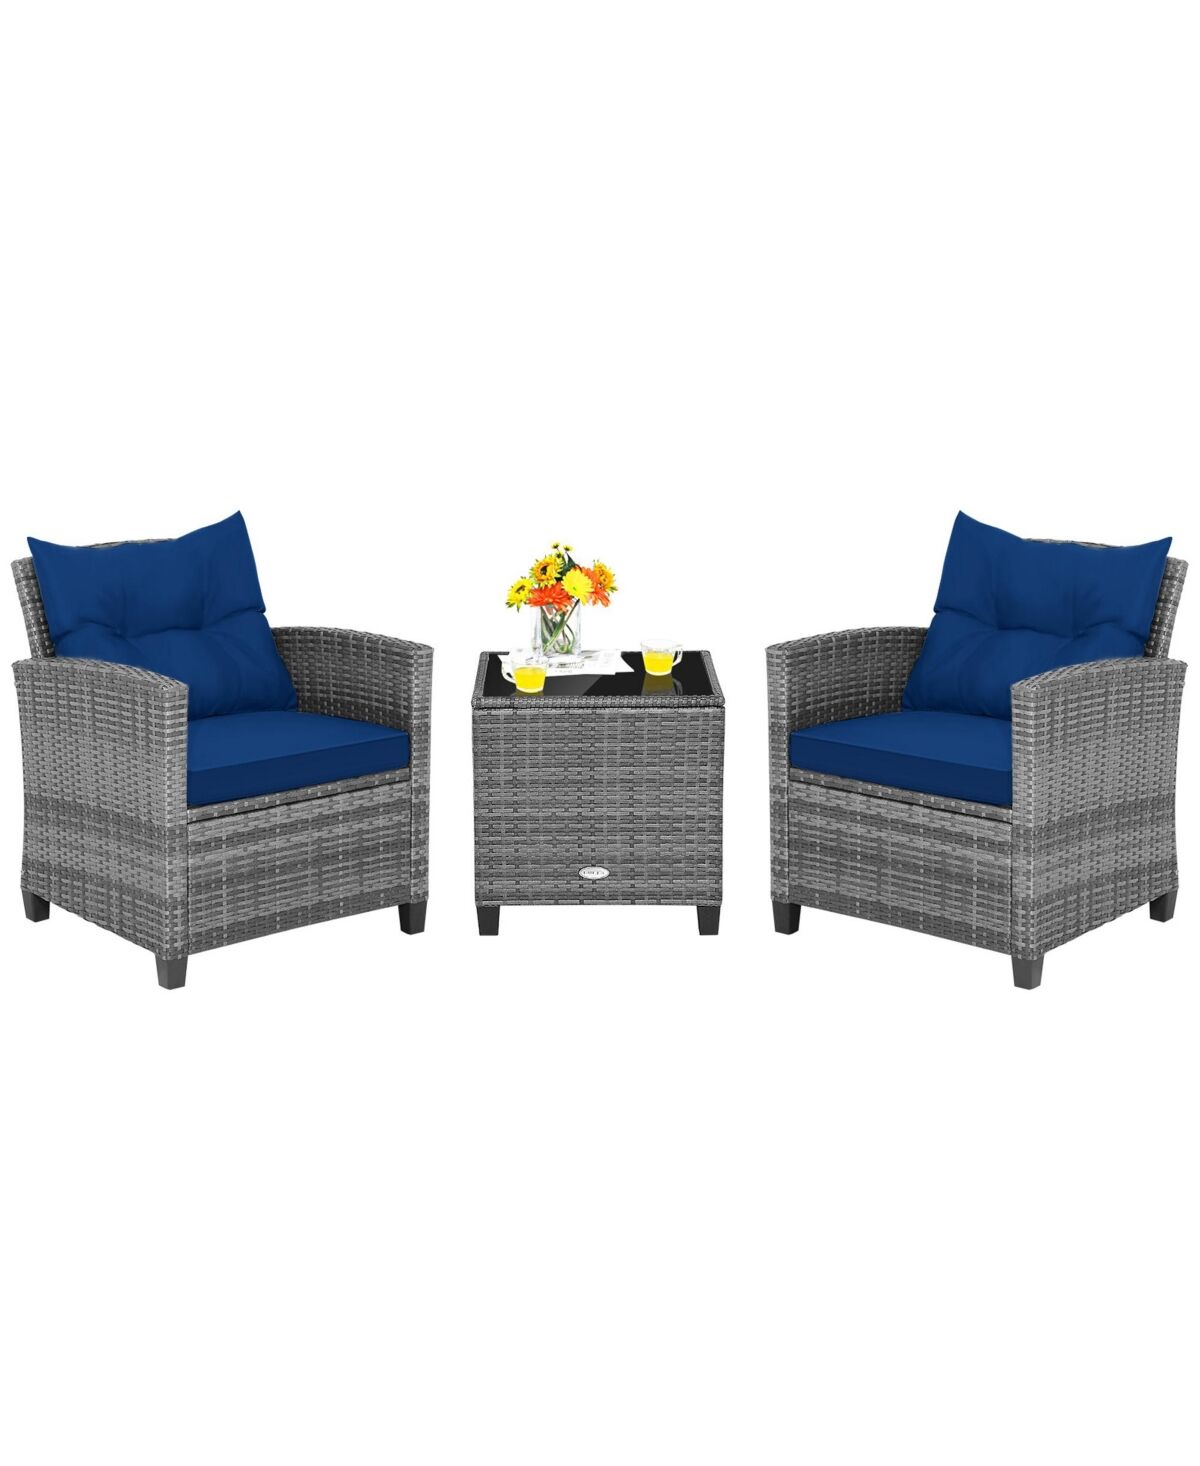 Costway 3PCS Patio Rattan Furniture Bistro Set Cushioned Sofas Side Table Armrest - Navy